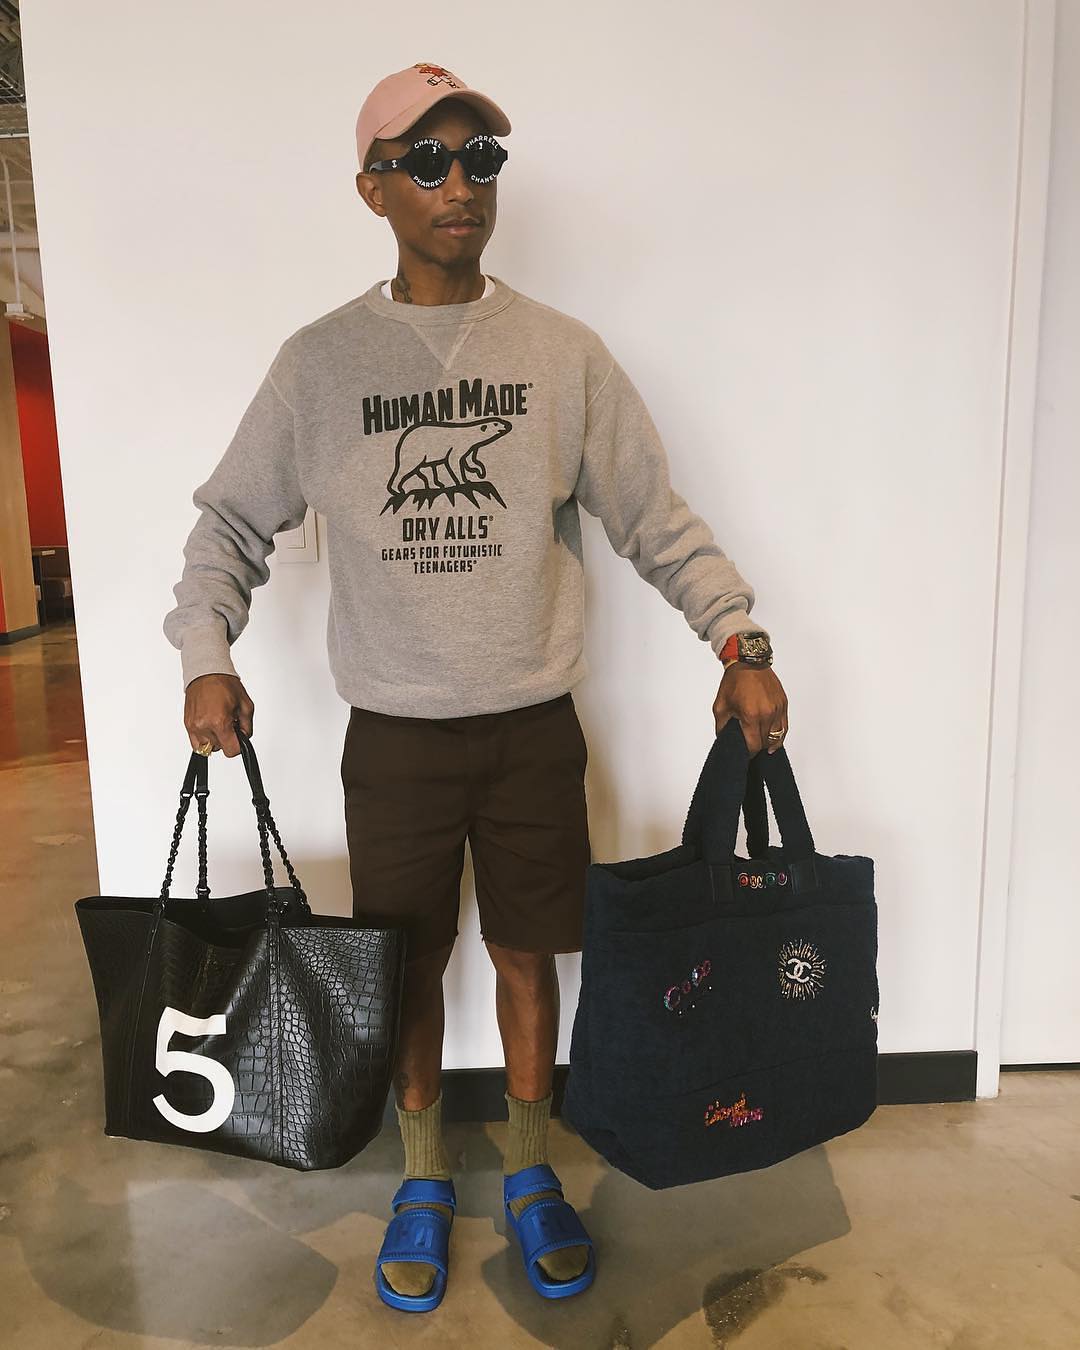 SPOTTED: Pharrell Launches ‘Chanel Pharrell’ Collection in LA